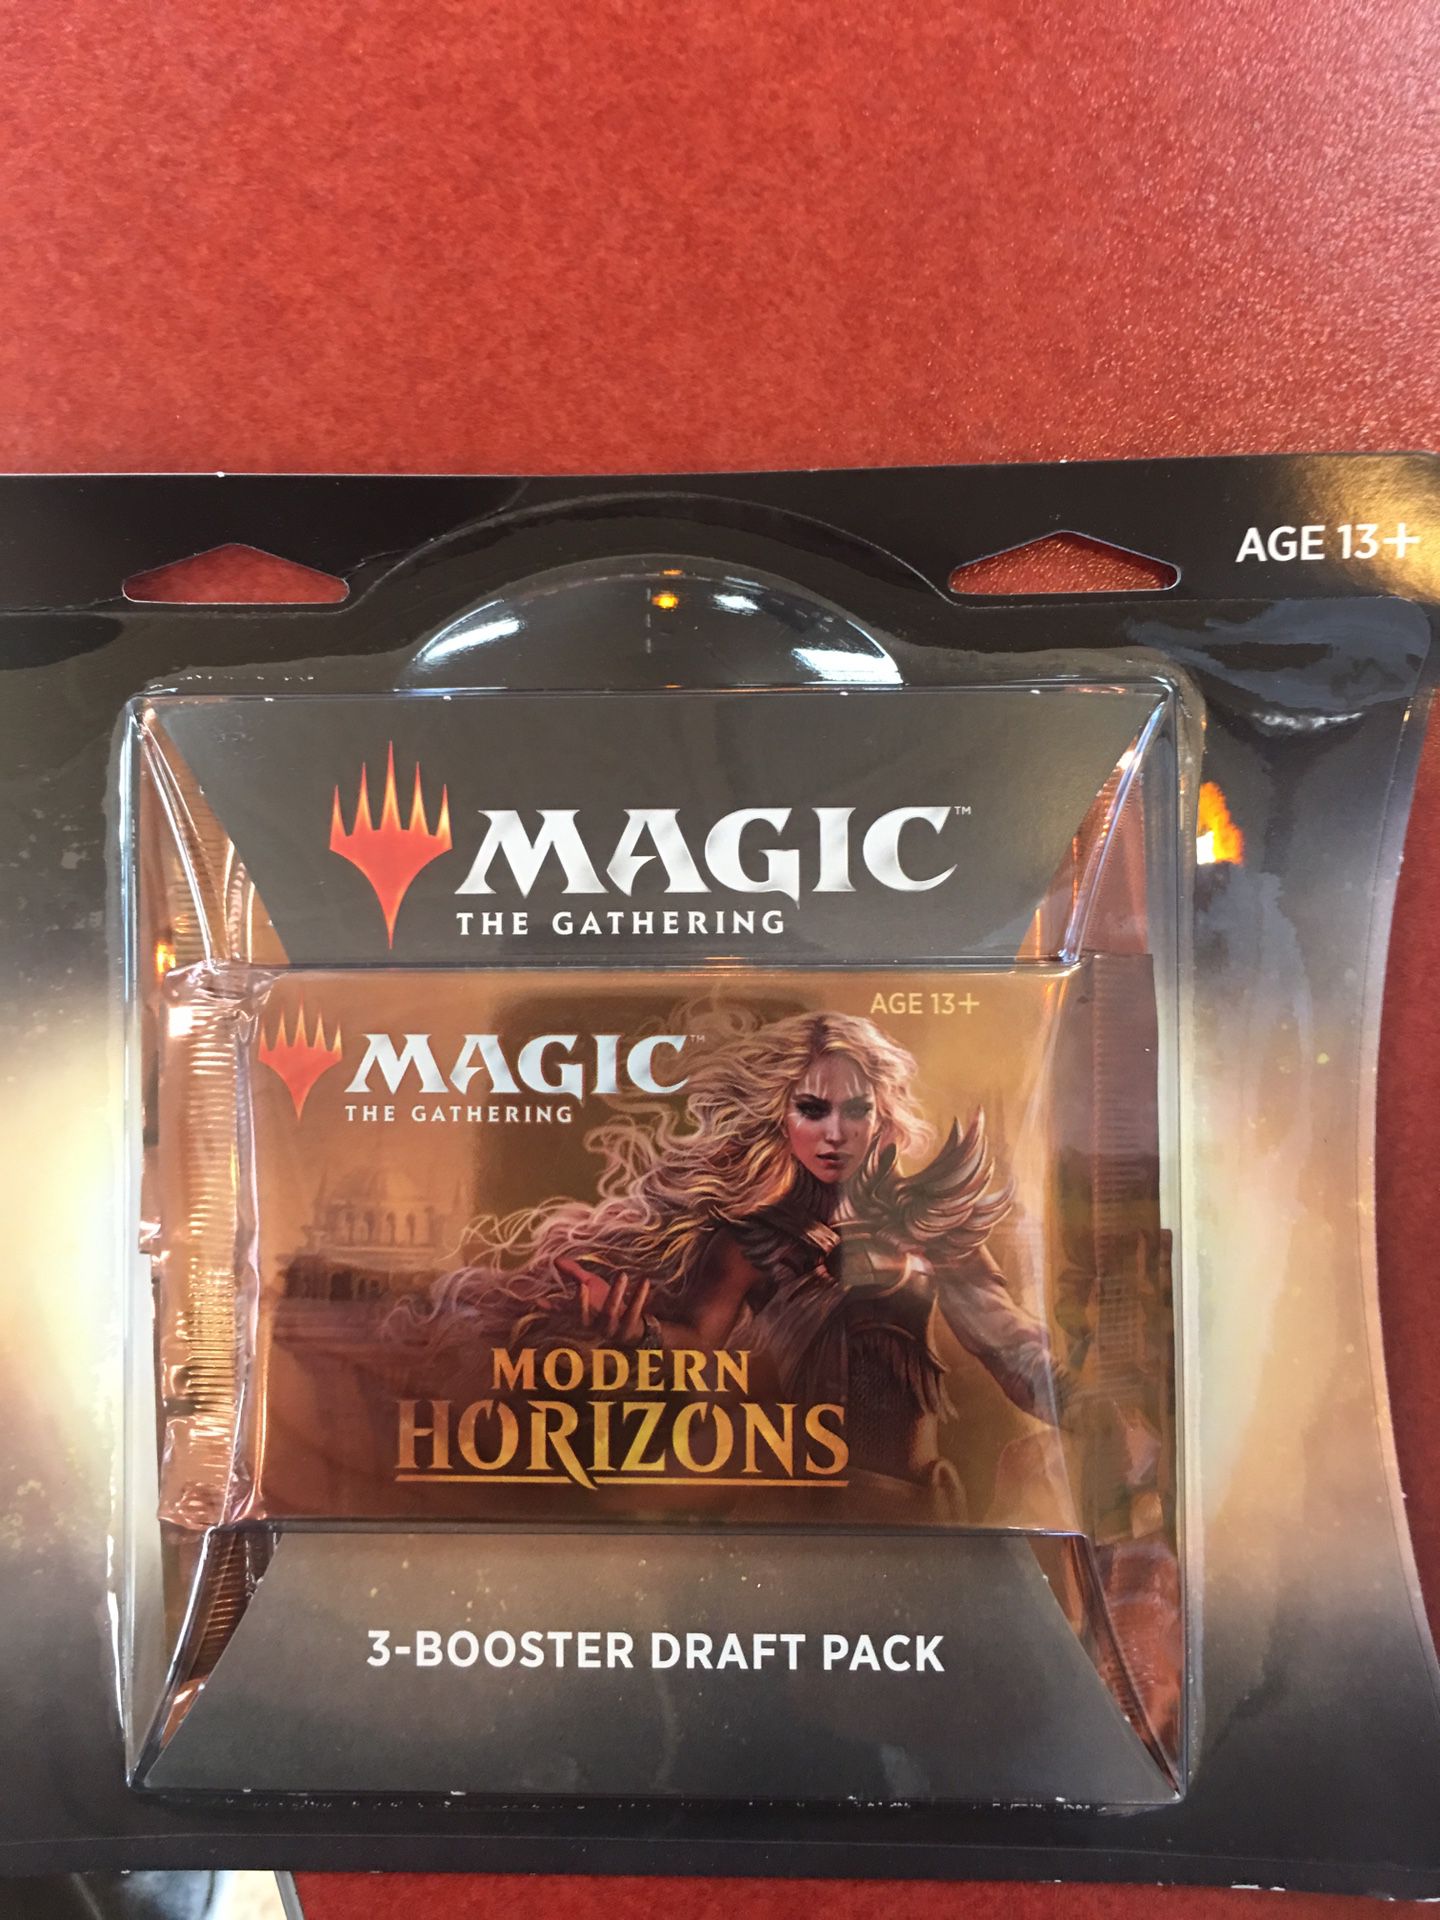 Magic the gAthering modern horizons 3- booster pack packs 10 so 30 booster packs